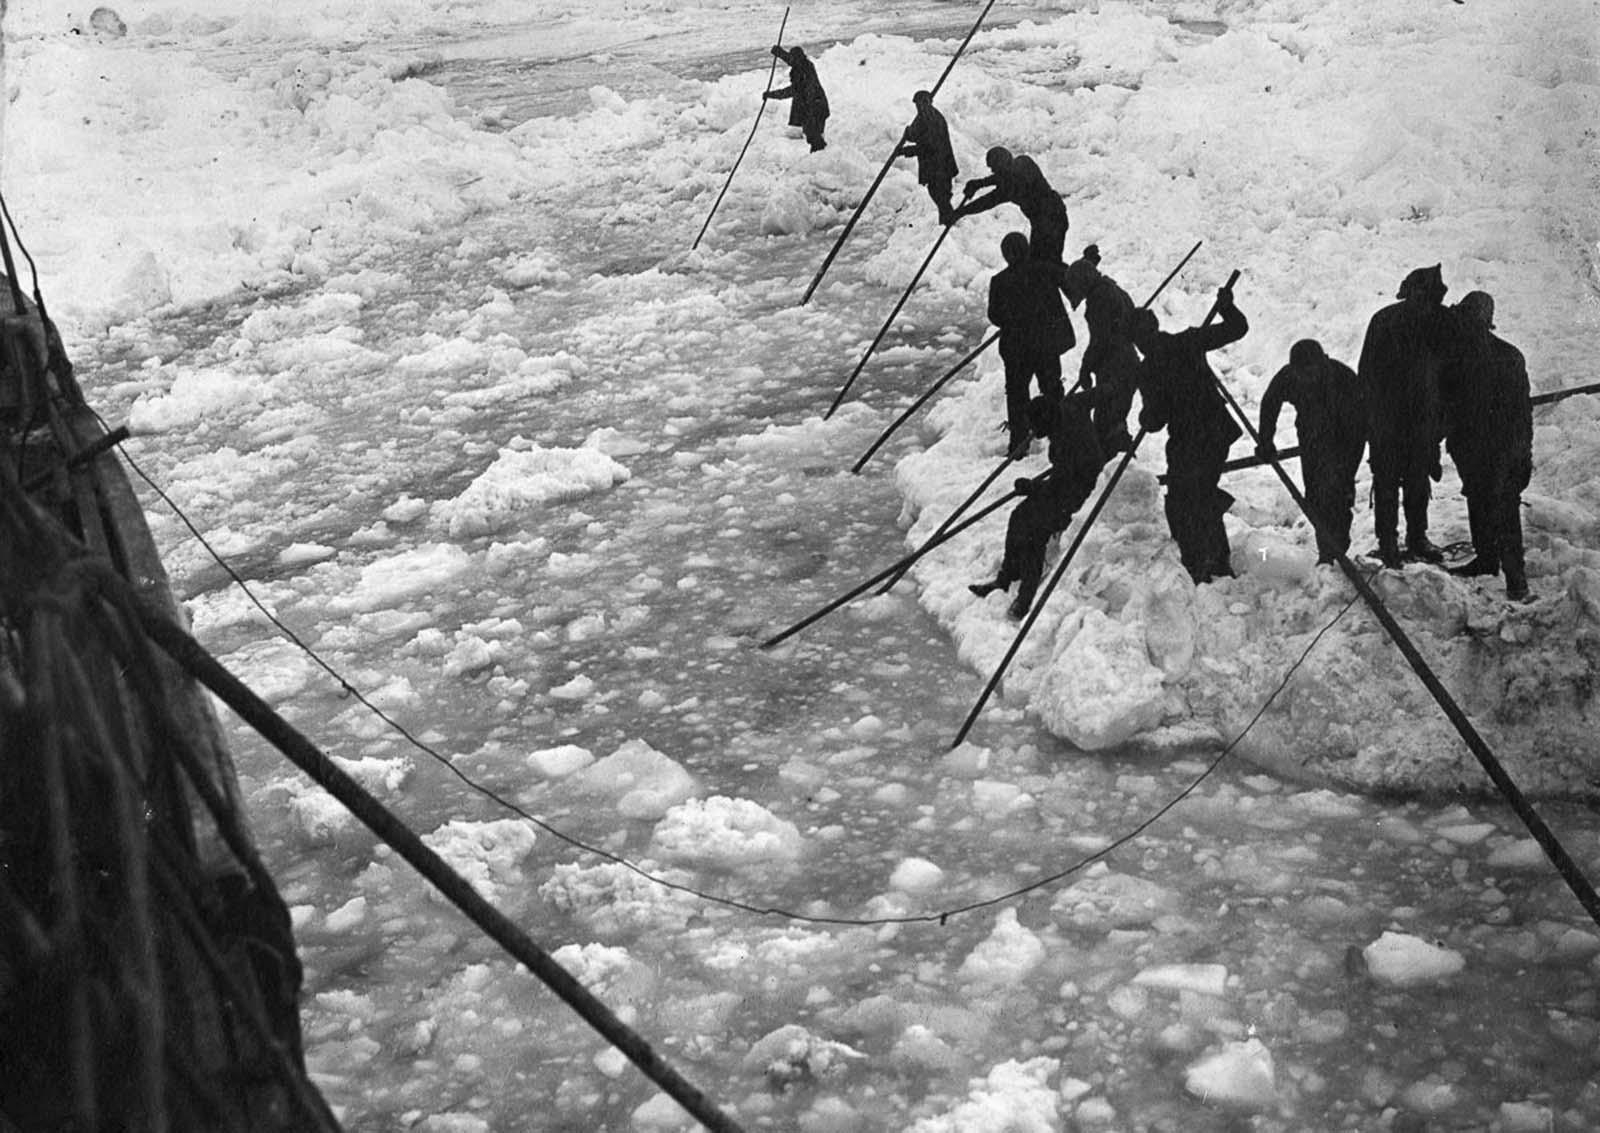 Crew attempt to clear a path through the ice for Endurance.